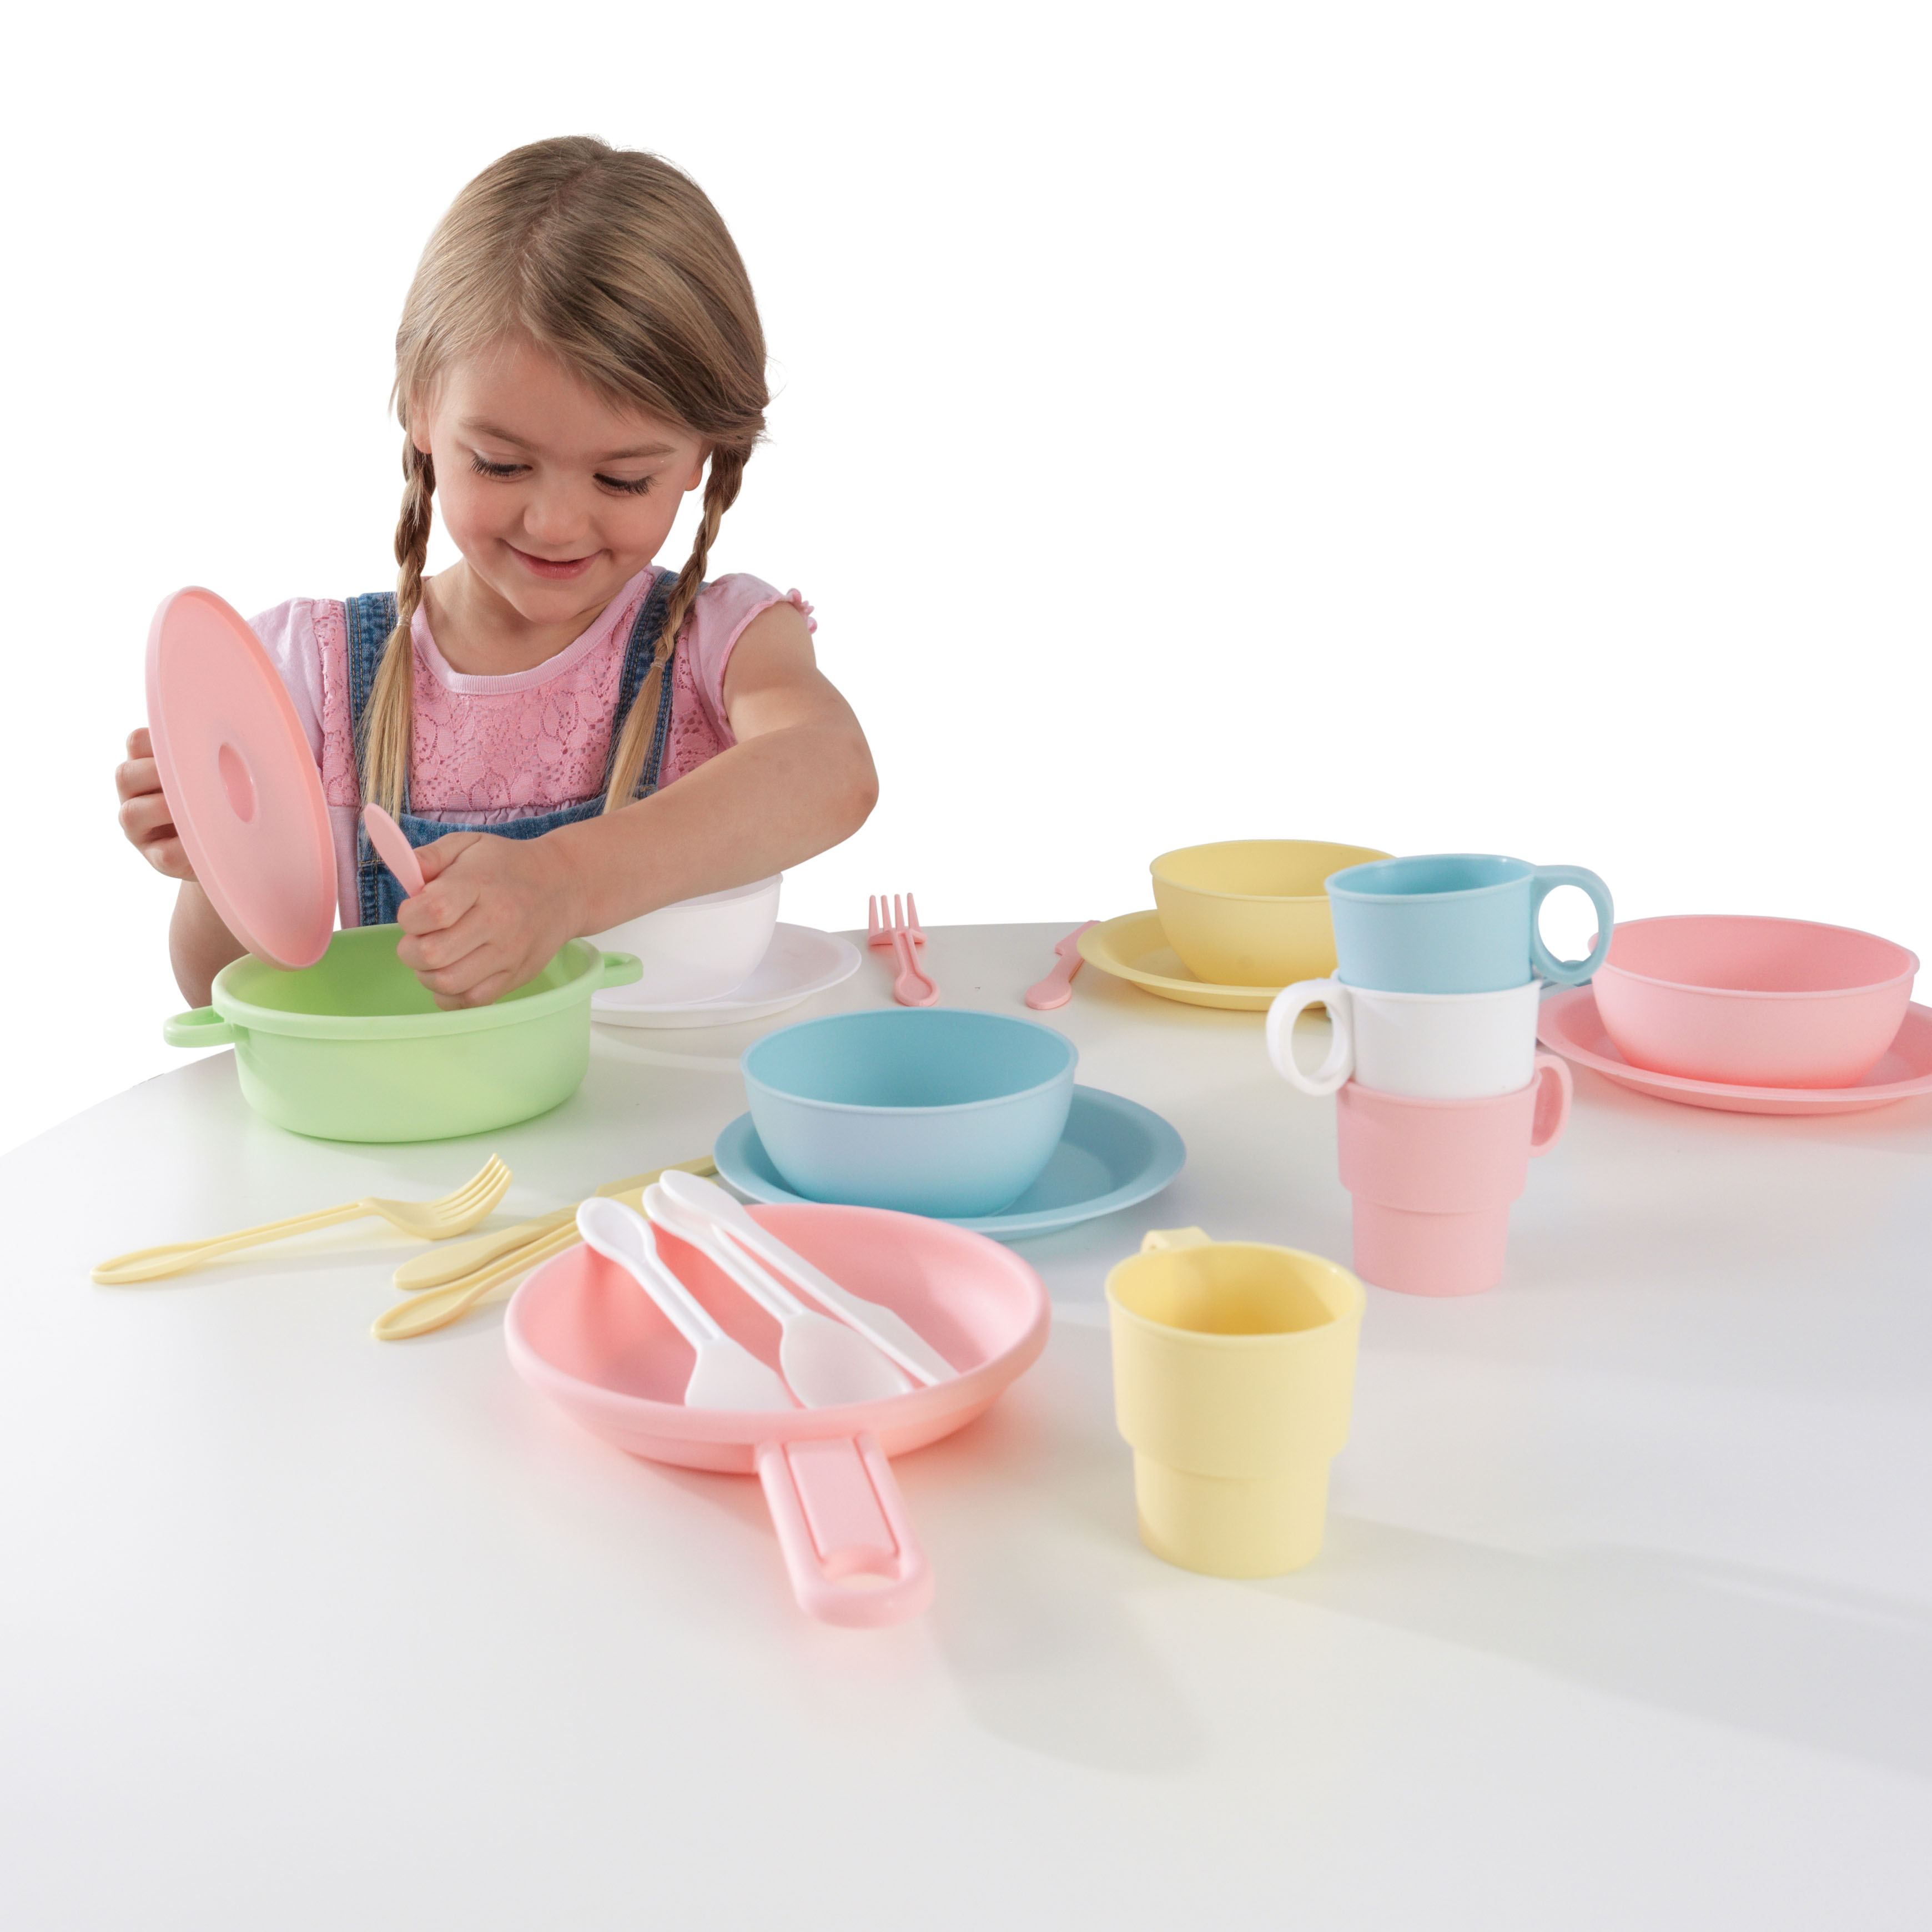 KidKraft 27-Piece Pastel Cookware Set, Plastic Dishes & Utensils for Play Kitchens - image 4 of 5